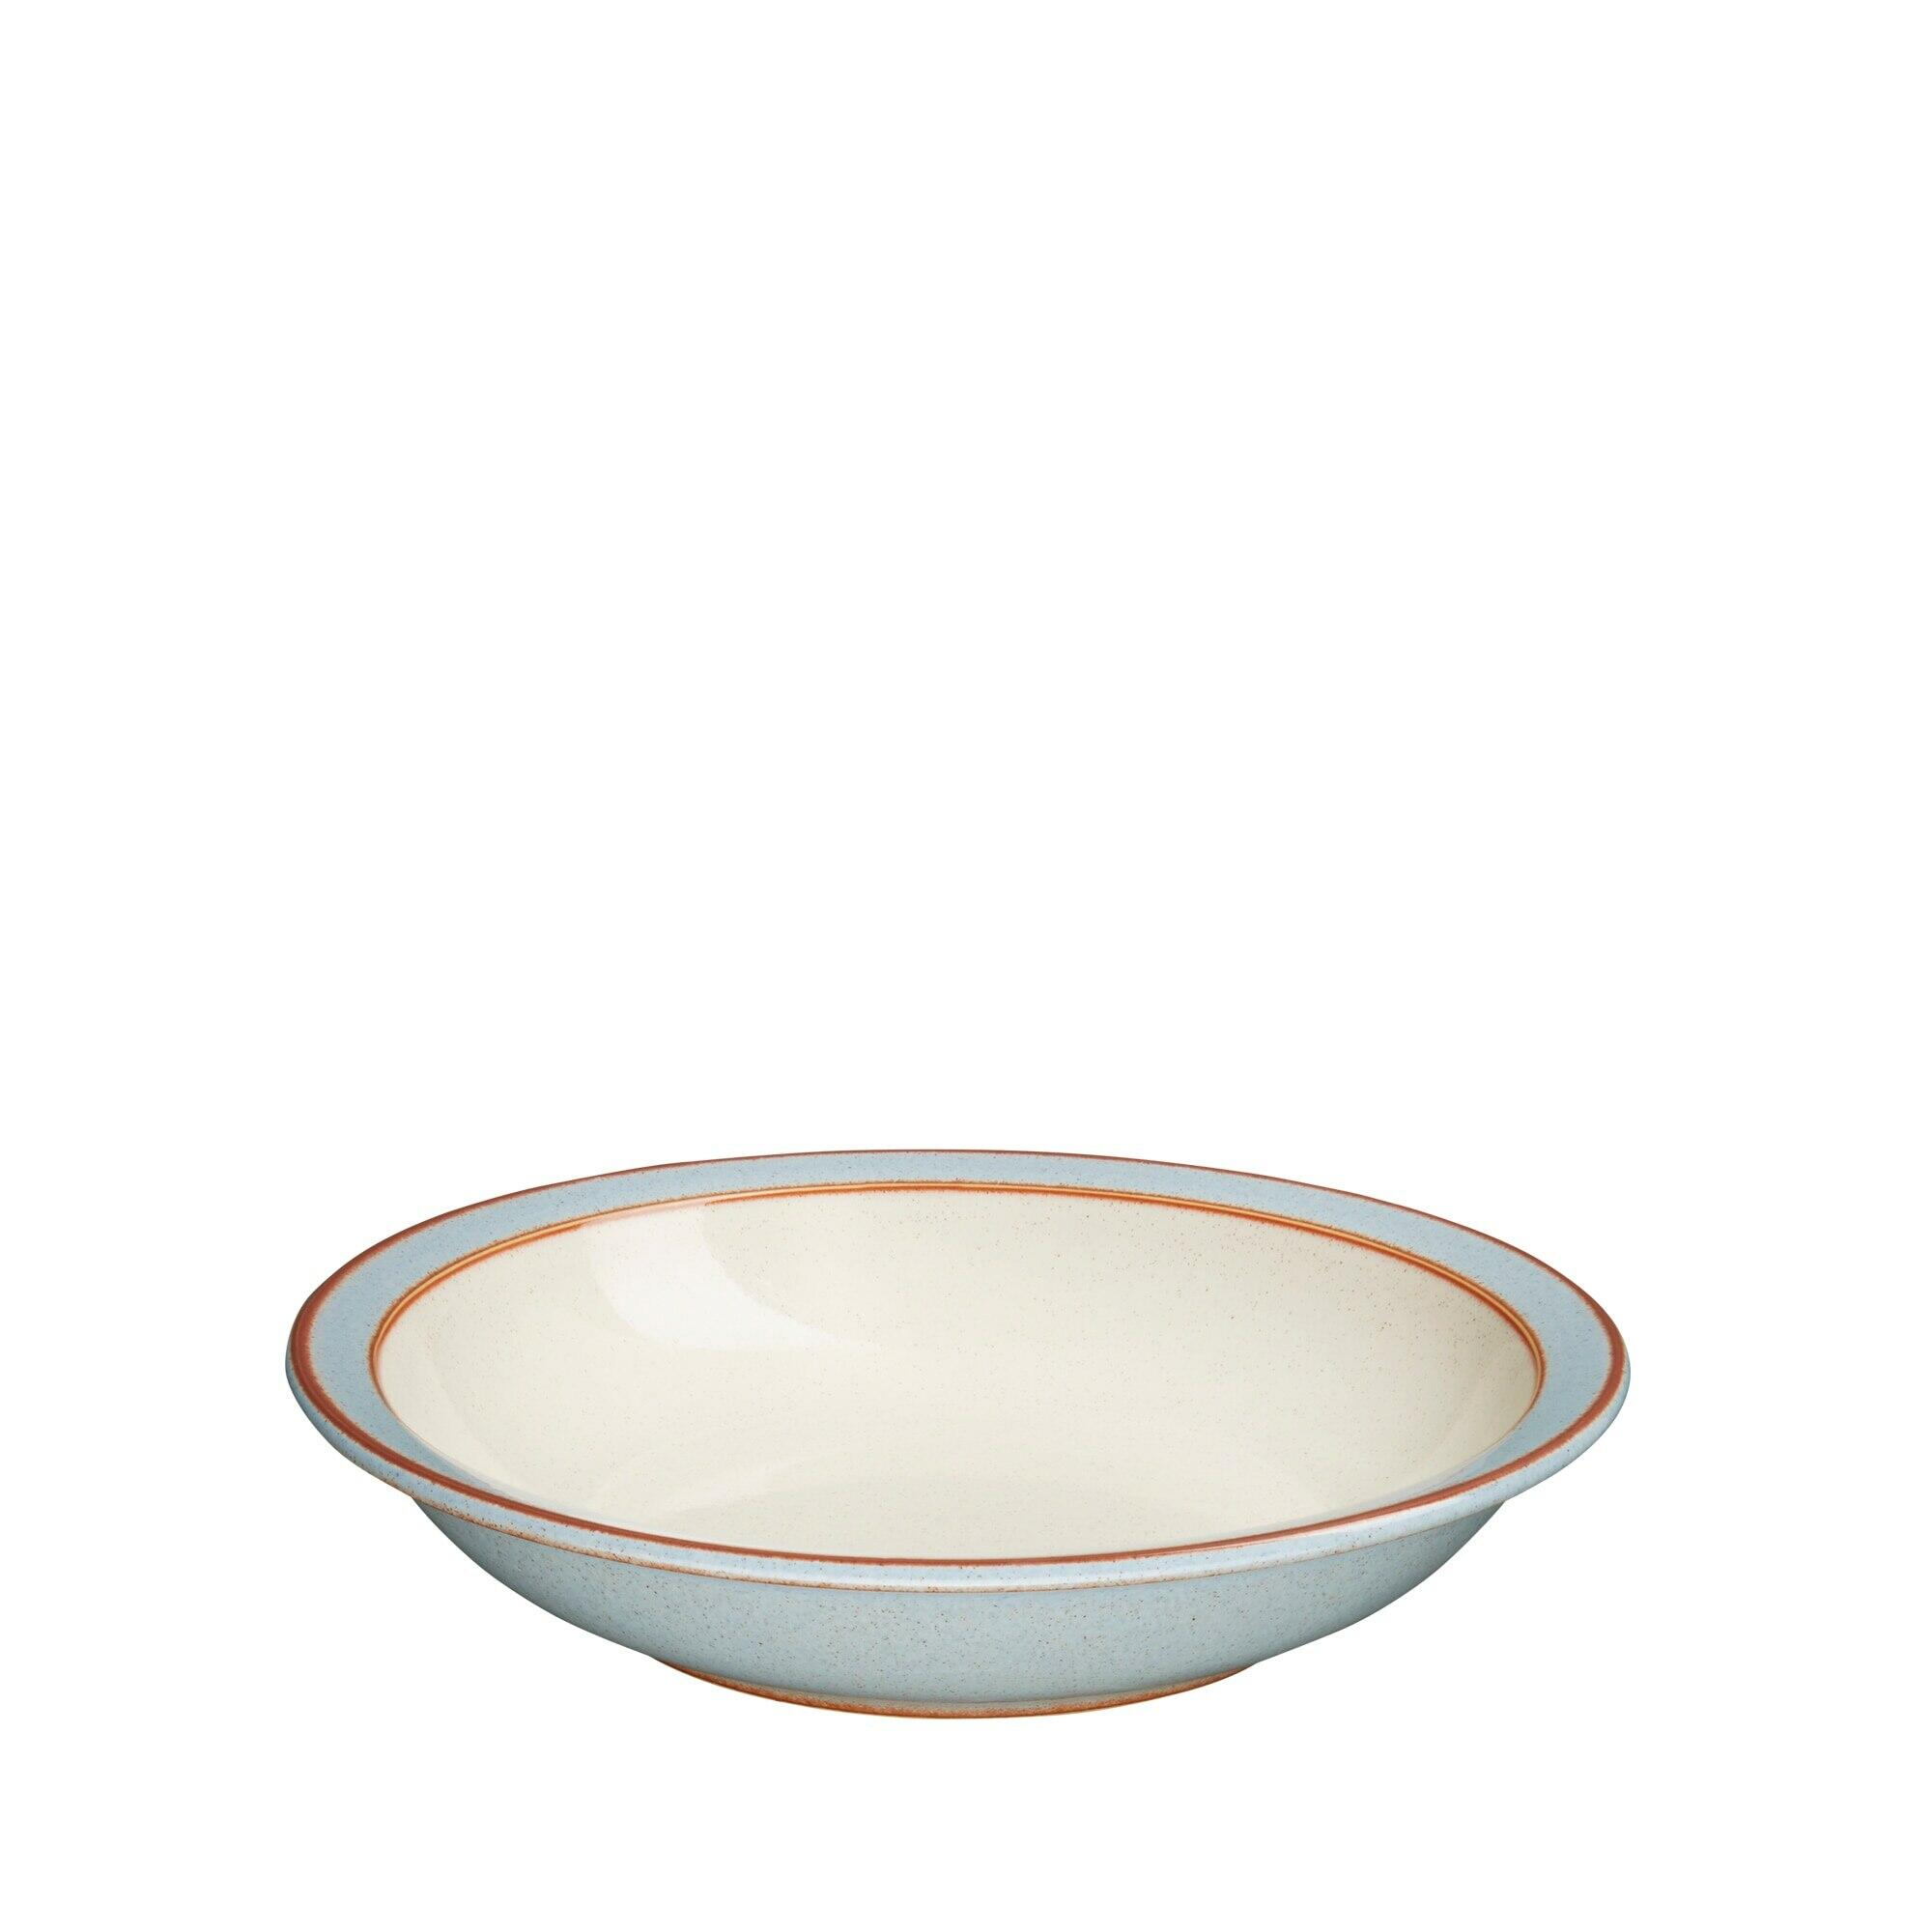 Heritage Terrace Shallow Rimmed Bowl